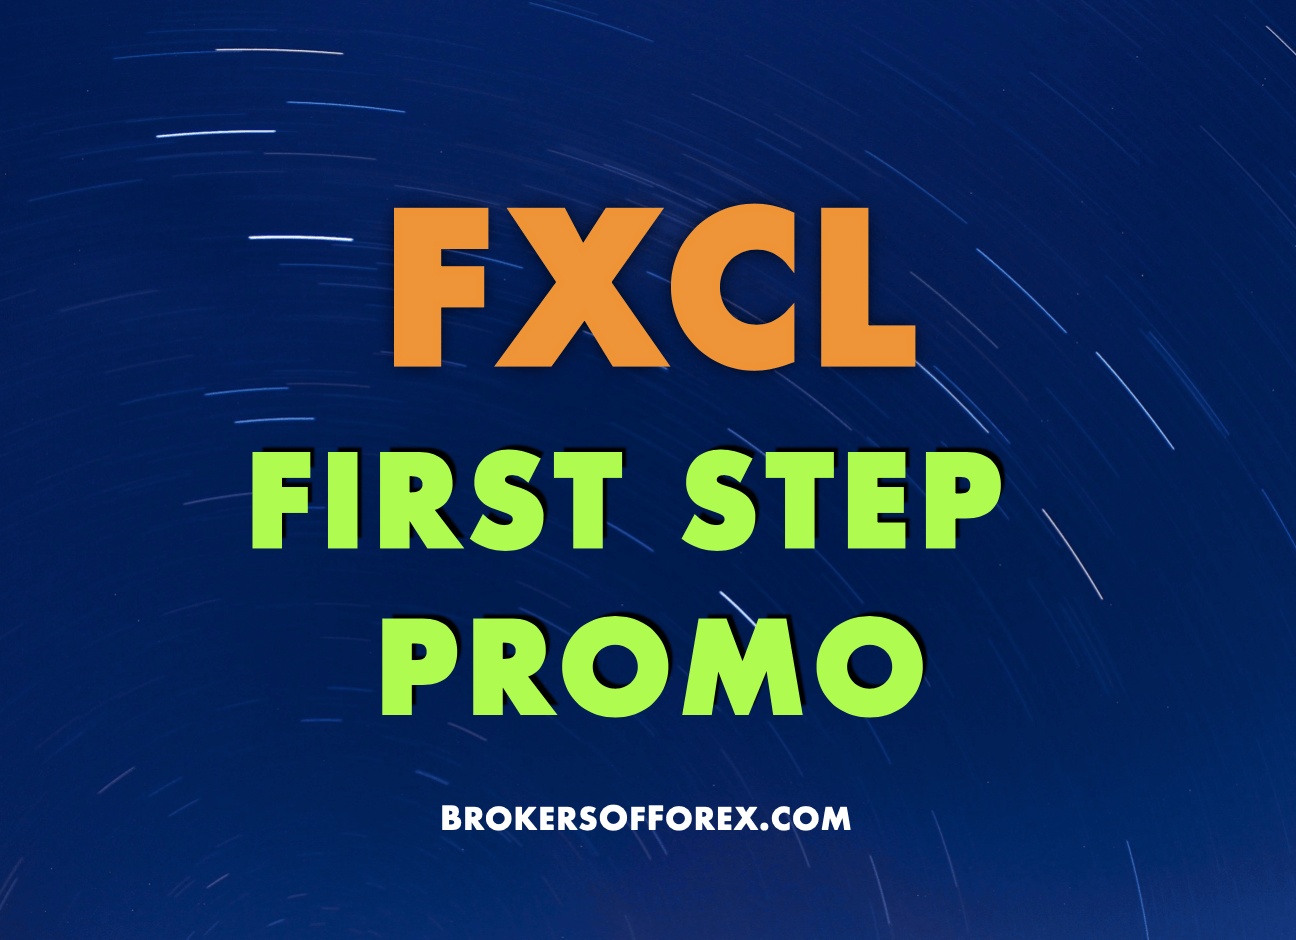 FXCL First Step Promo